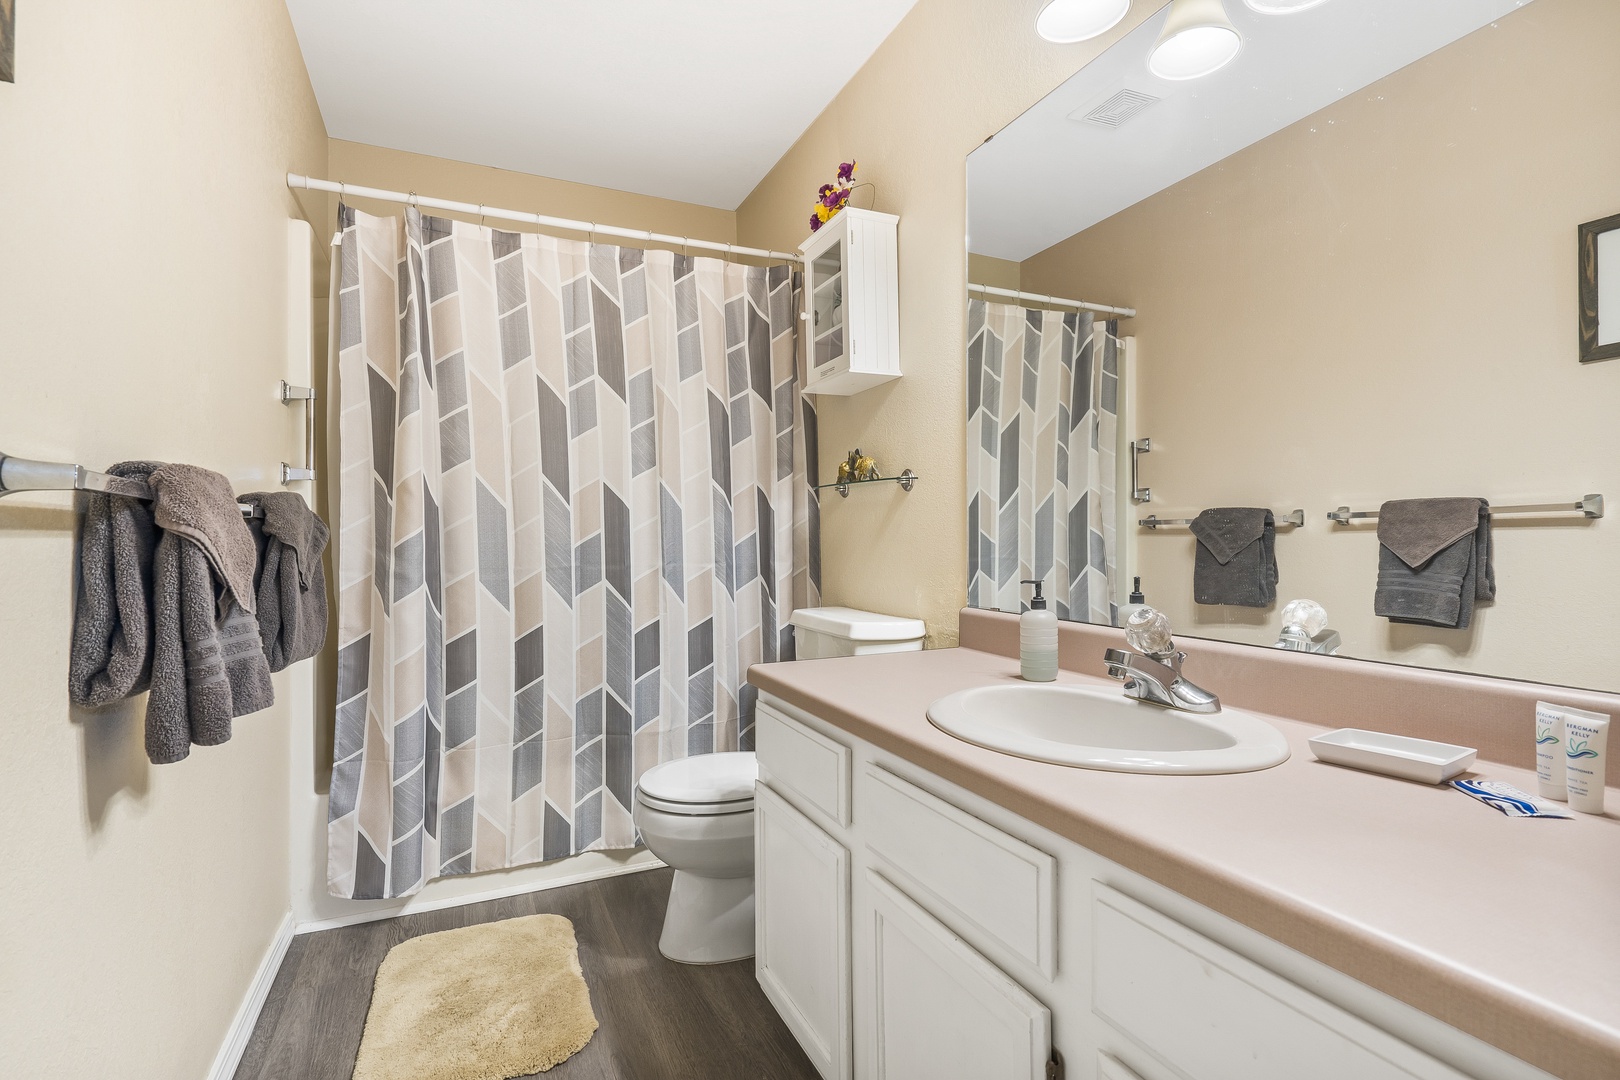 Enjoy the single vanity & shower/tub combo in the master ensuite